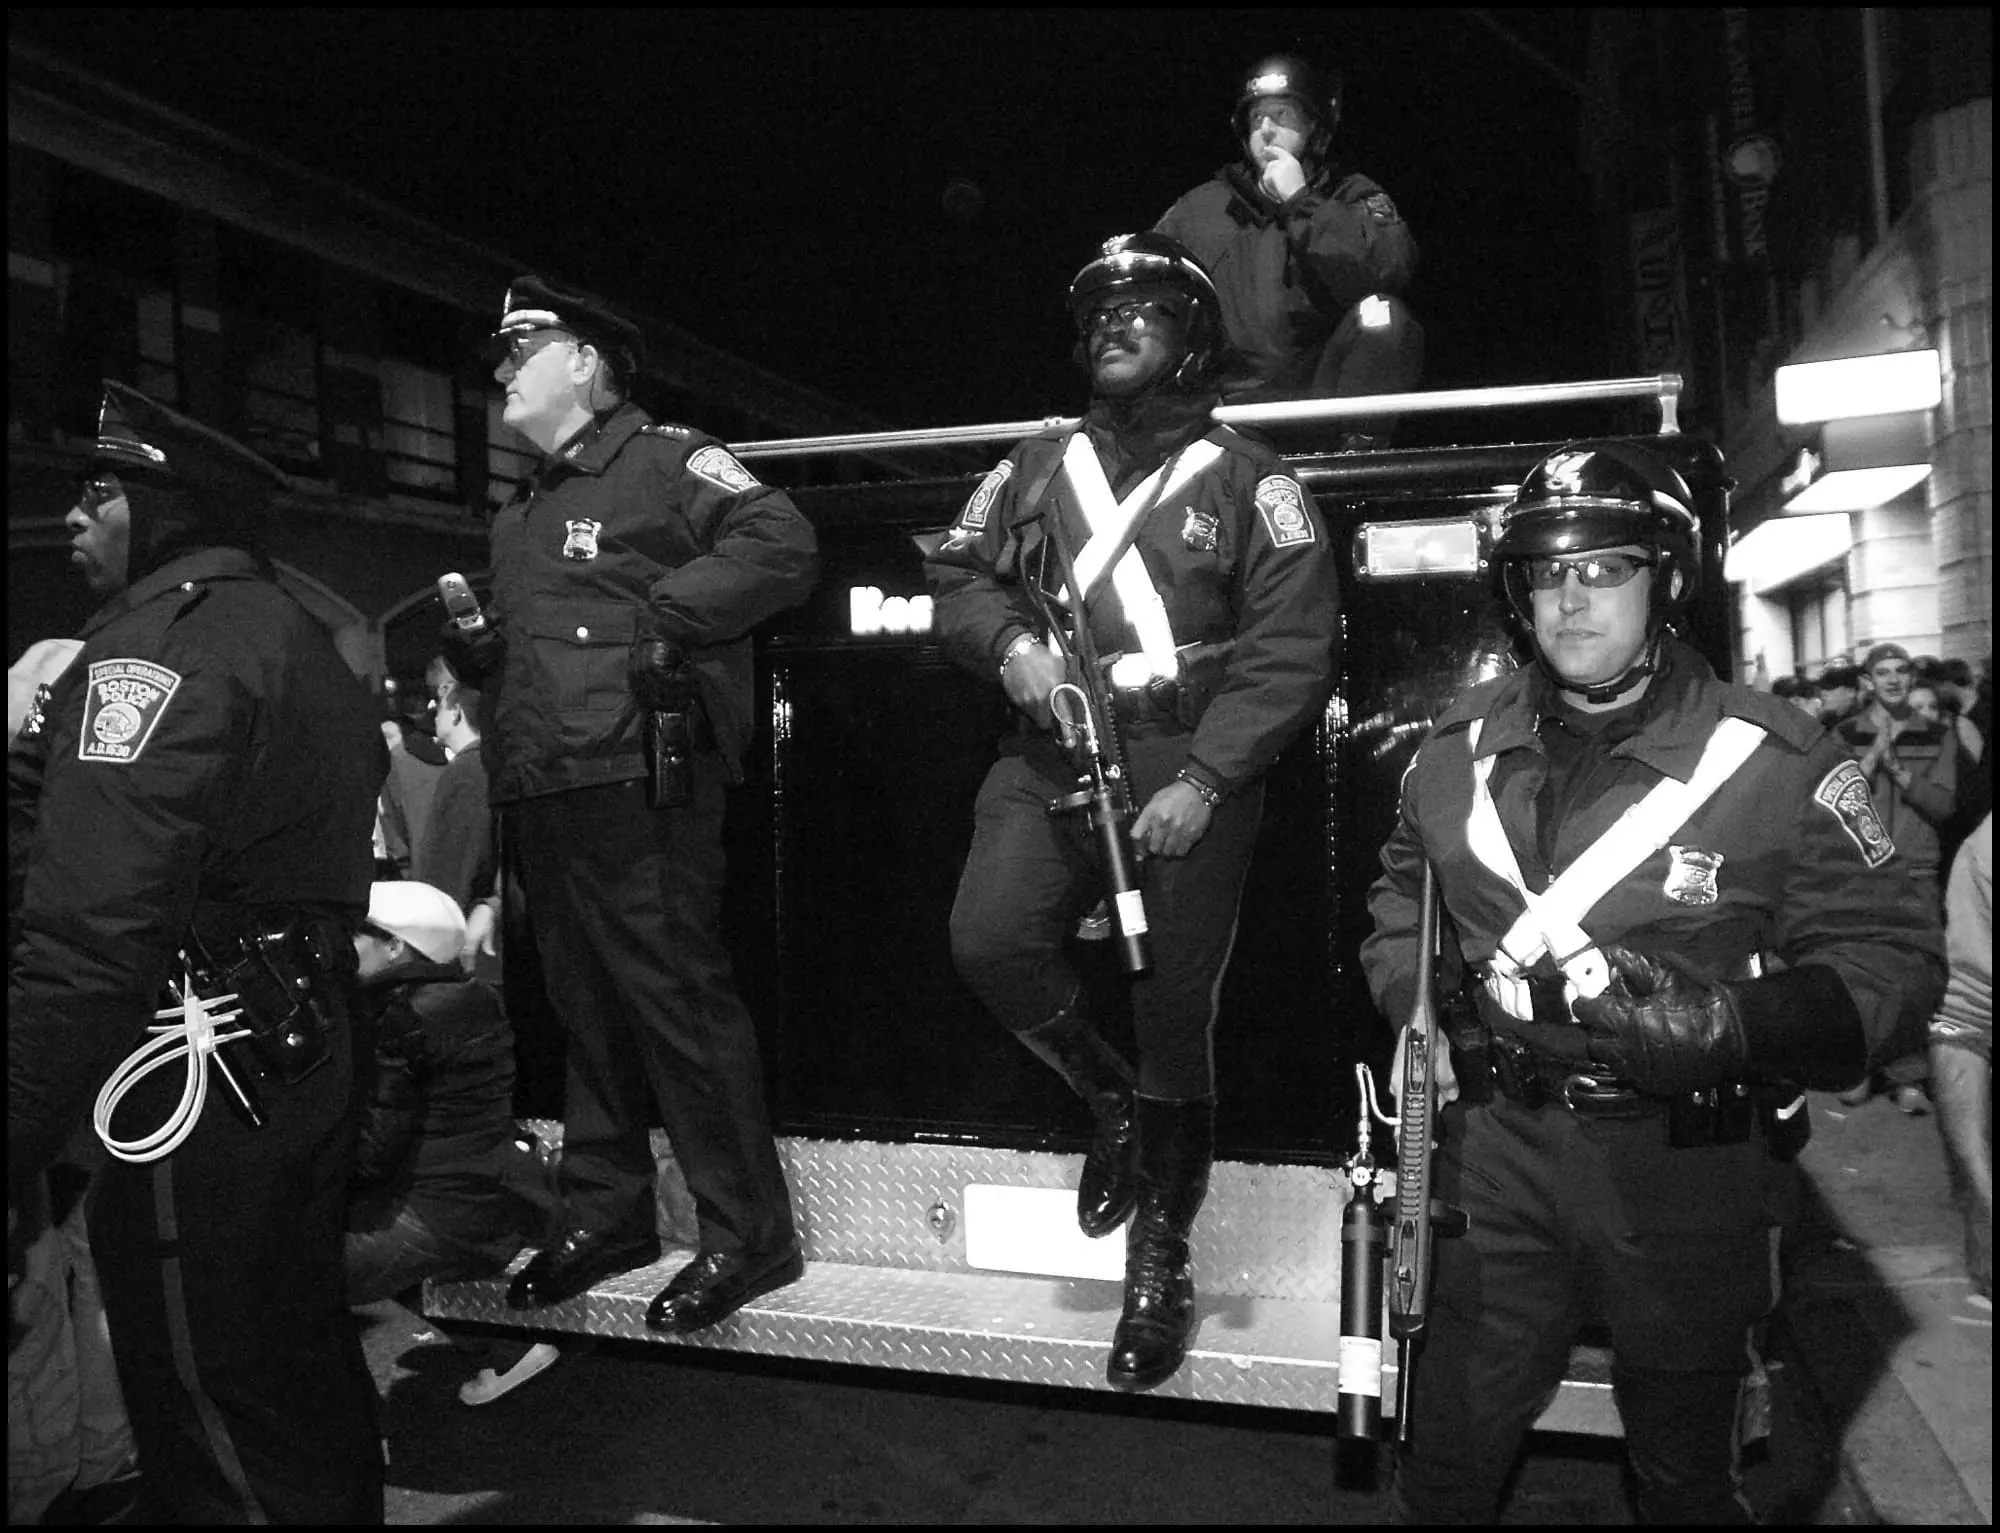 Commander Robert O'Toole (second from left) stands outside Fenway Park with officers who appear to be Rochefort Milien (center) and Samir Silta (right) holding FN303 pepper ball guns.